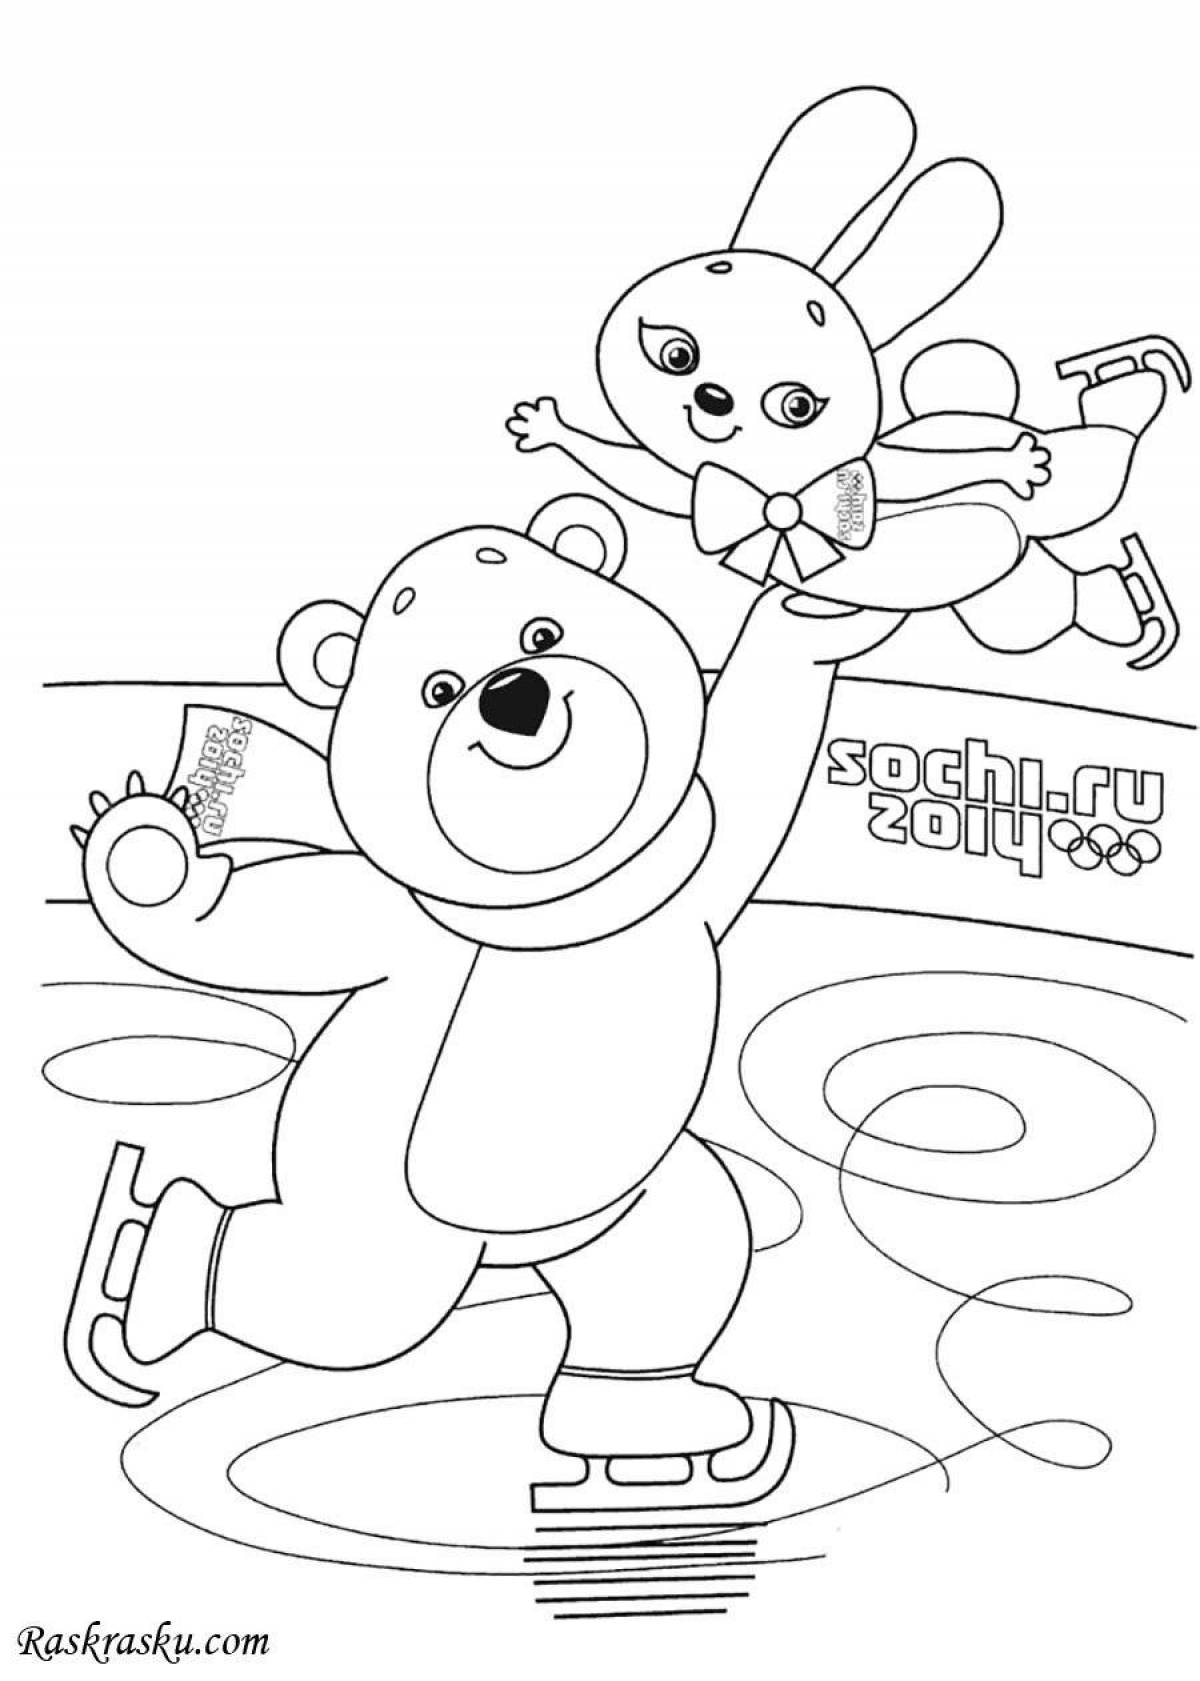 Playful coloring book for children 3-4 years old winter sports